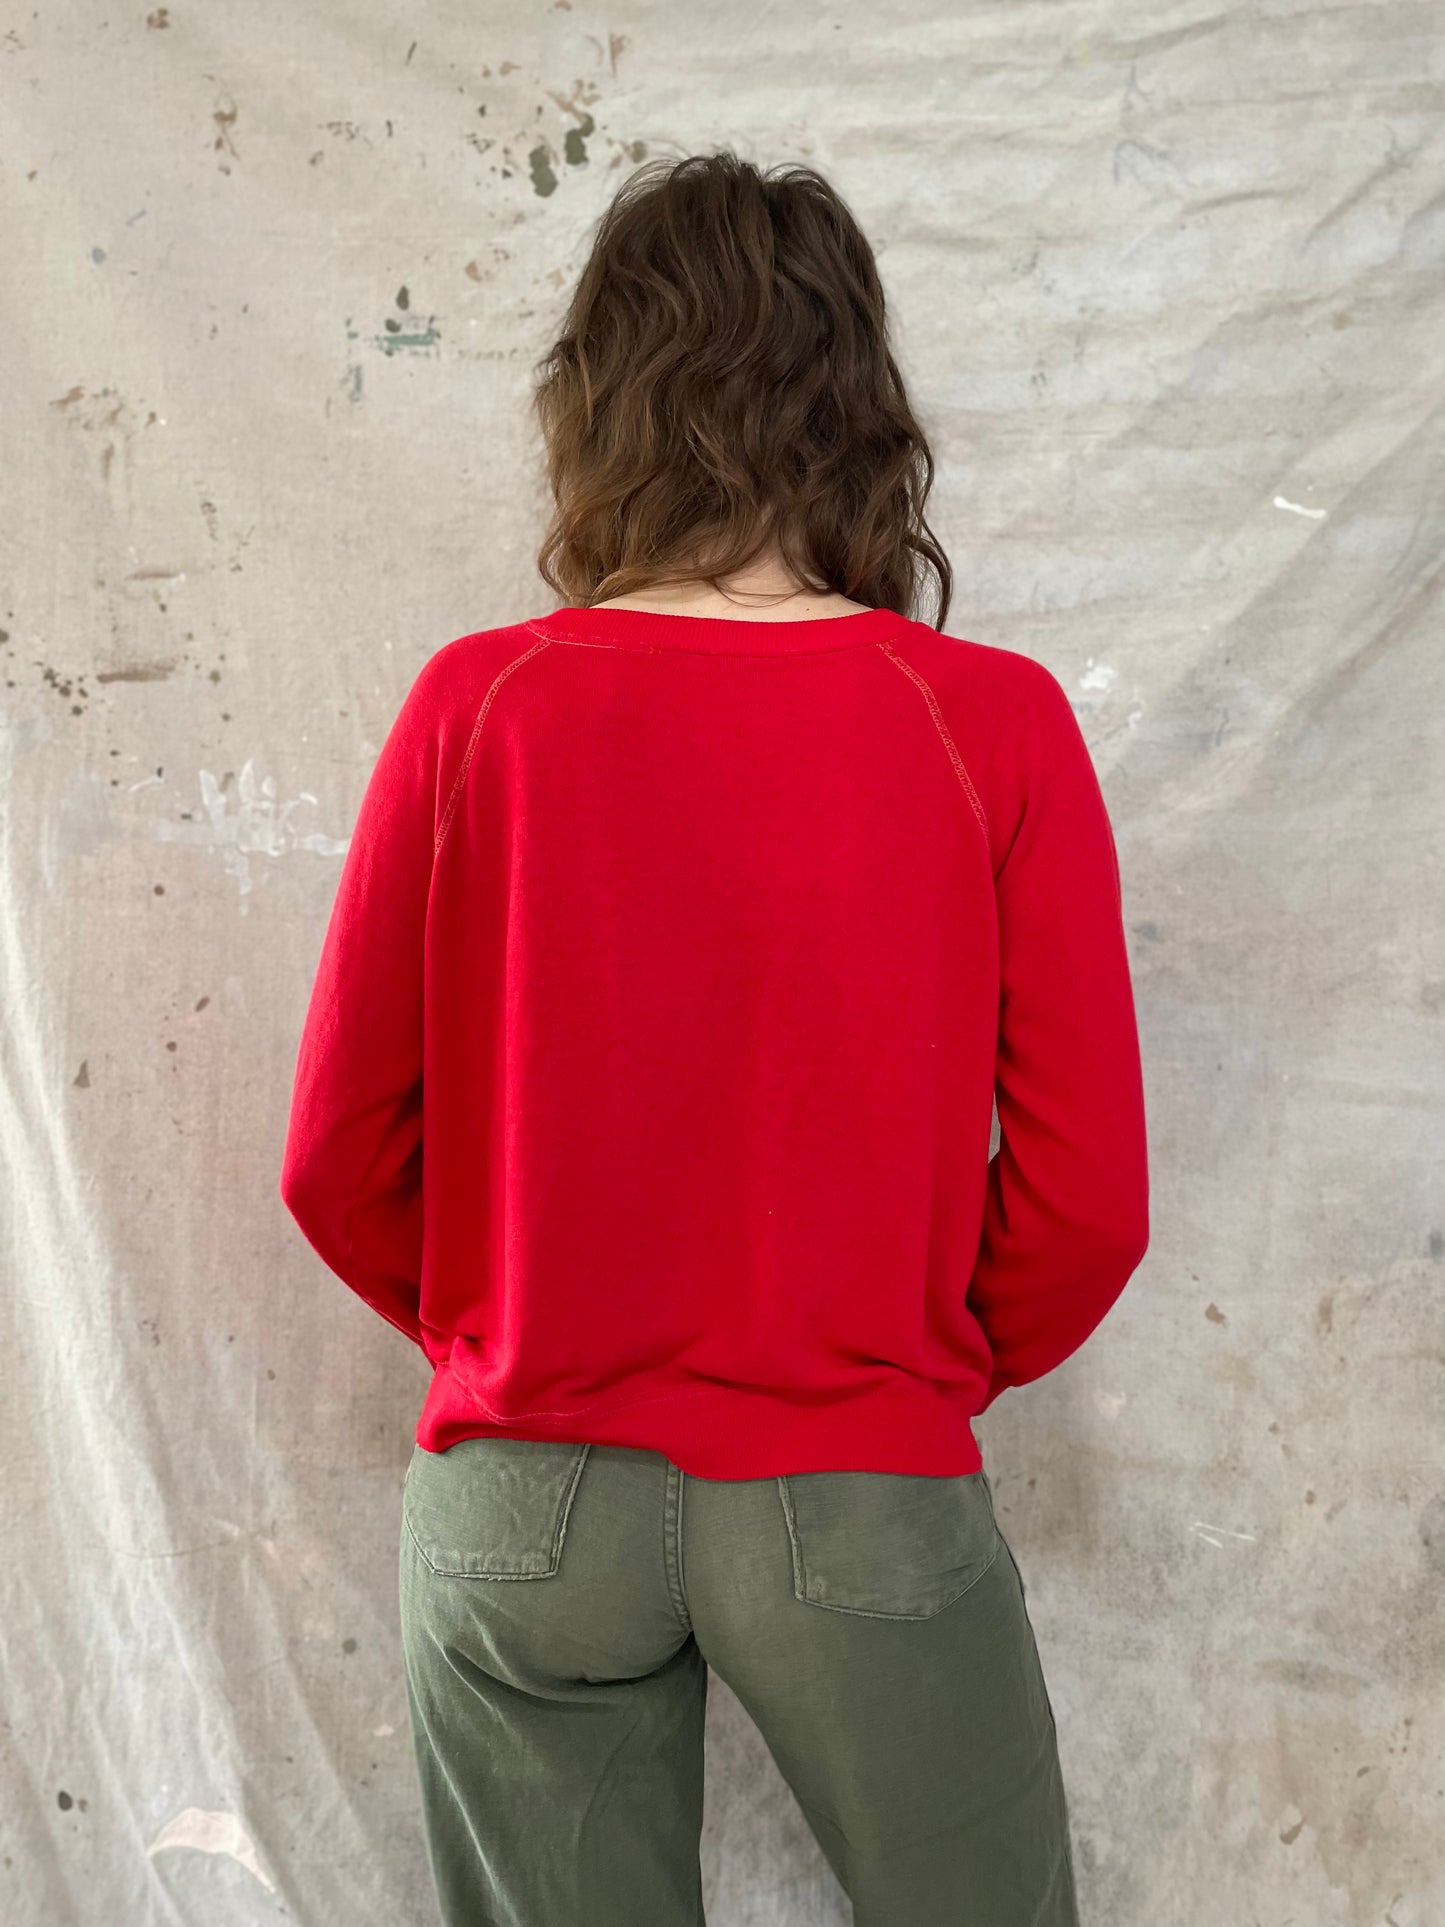 70s/80s Buttery Soft Red Sweatshirt